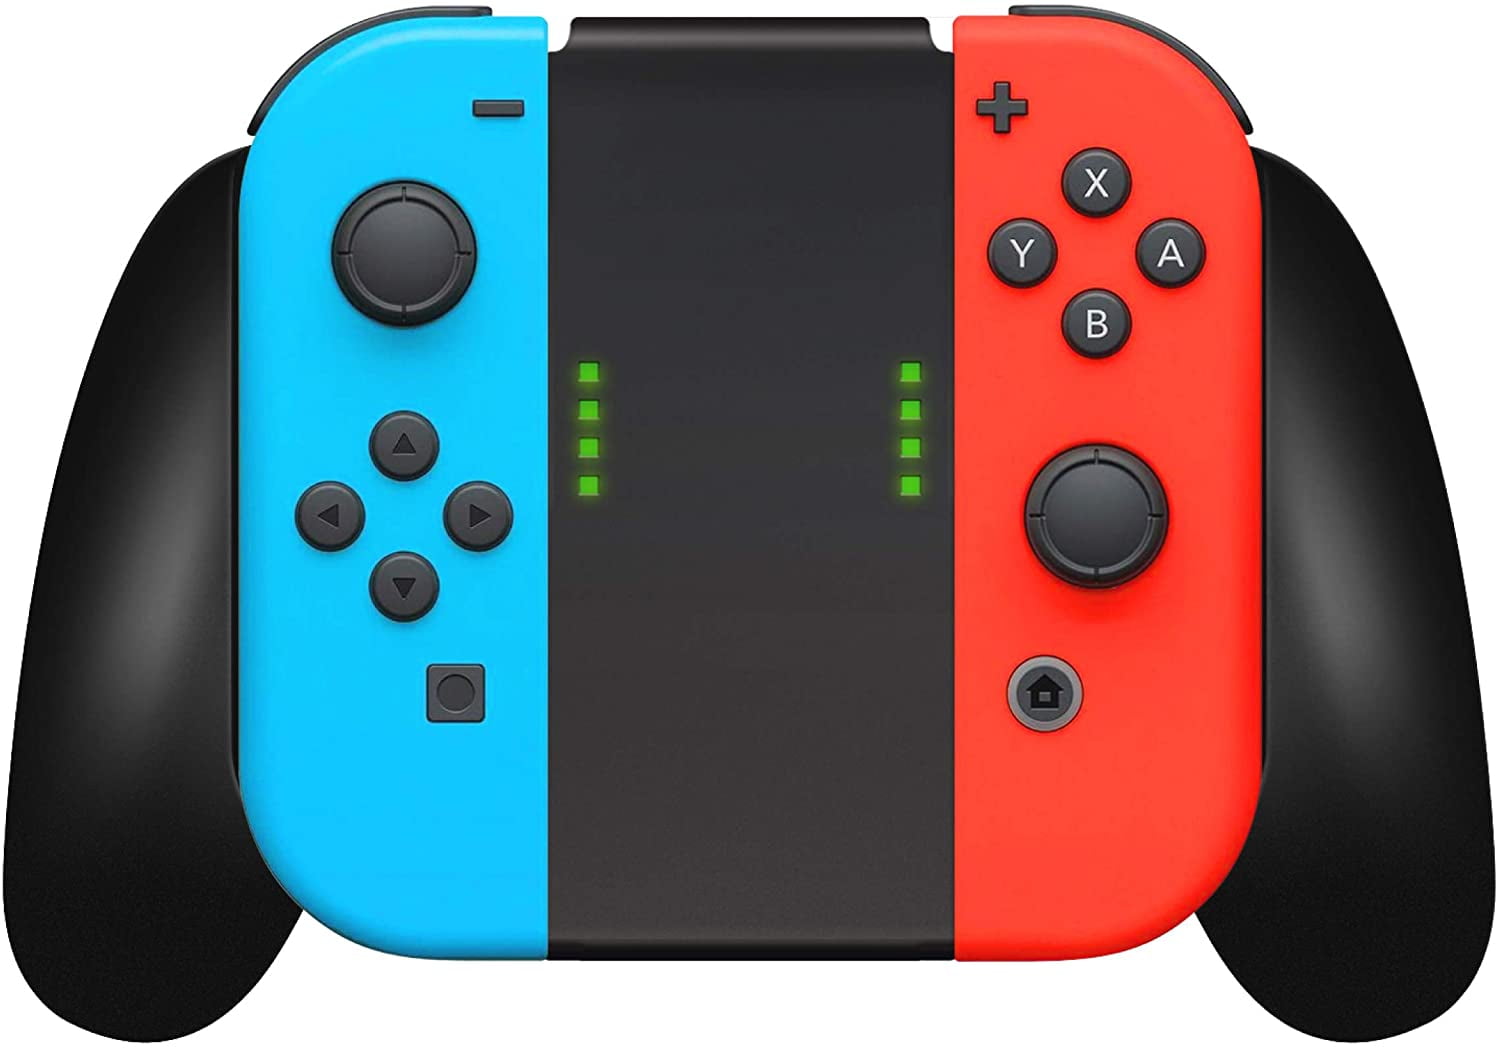 PDP Nintendo Switch JoyCon Grip with Charger, Joy-Con Ergonomic Comfort  Nintendo Switch Controller Grip, JoyCon Trigger extensions and Battery